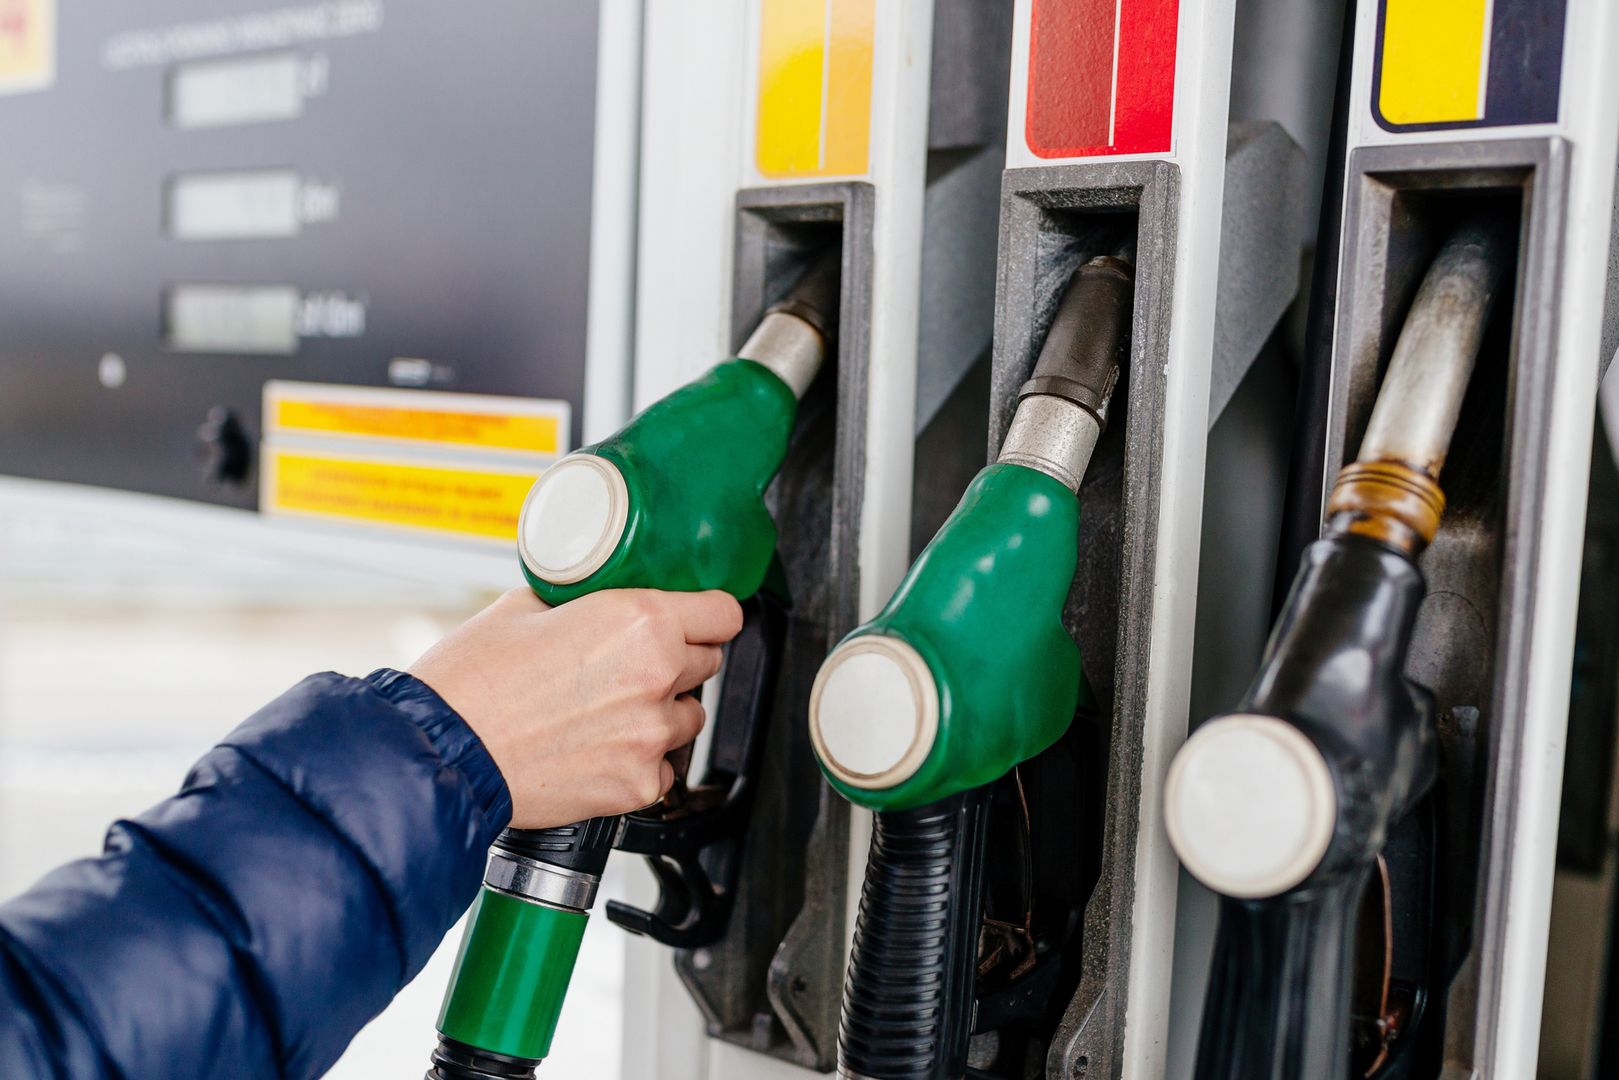 Woman holding a fuel nozzle on the gasoline station